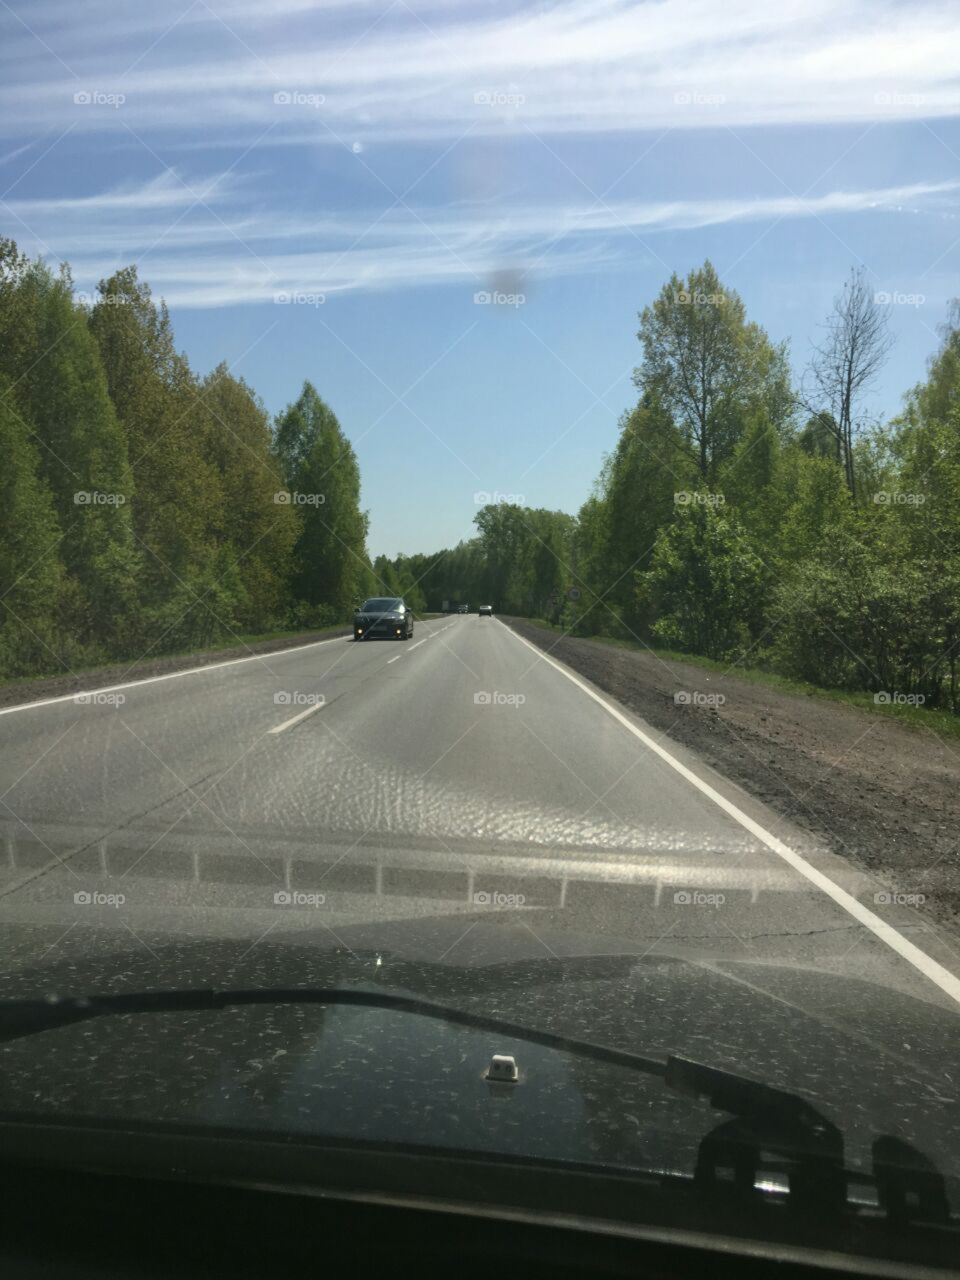 In The Road